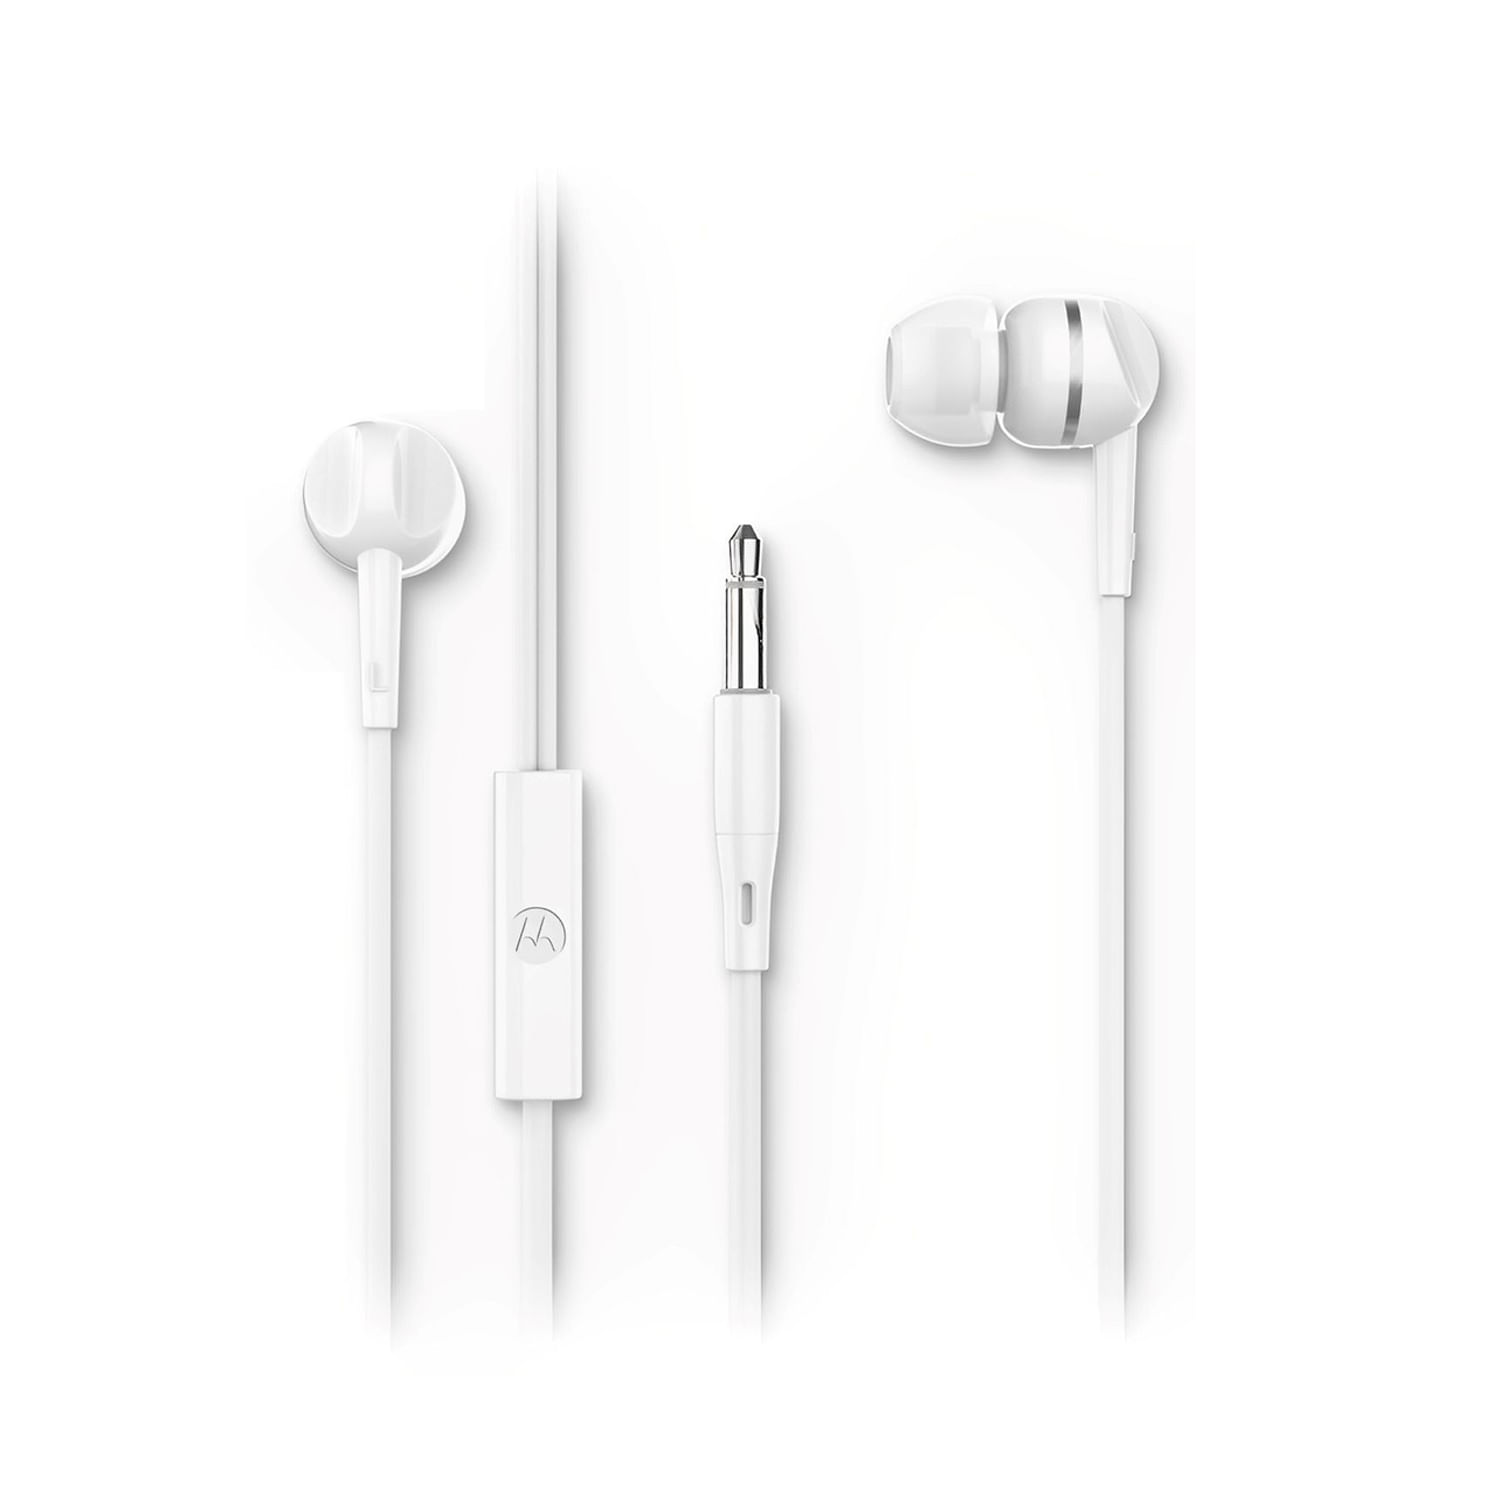 AudIfonos Motorola IN EAR Wired Con Micro Earbuds 105 Blanco